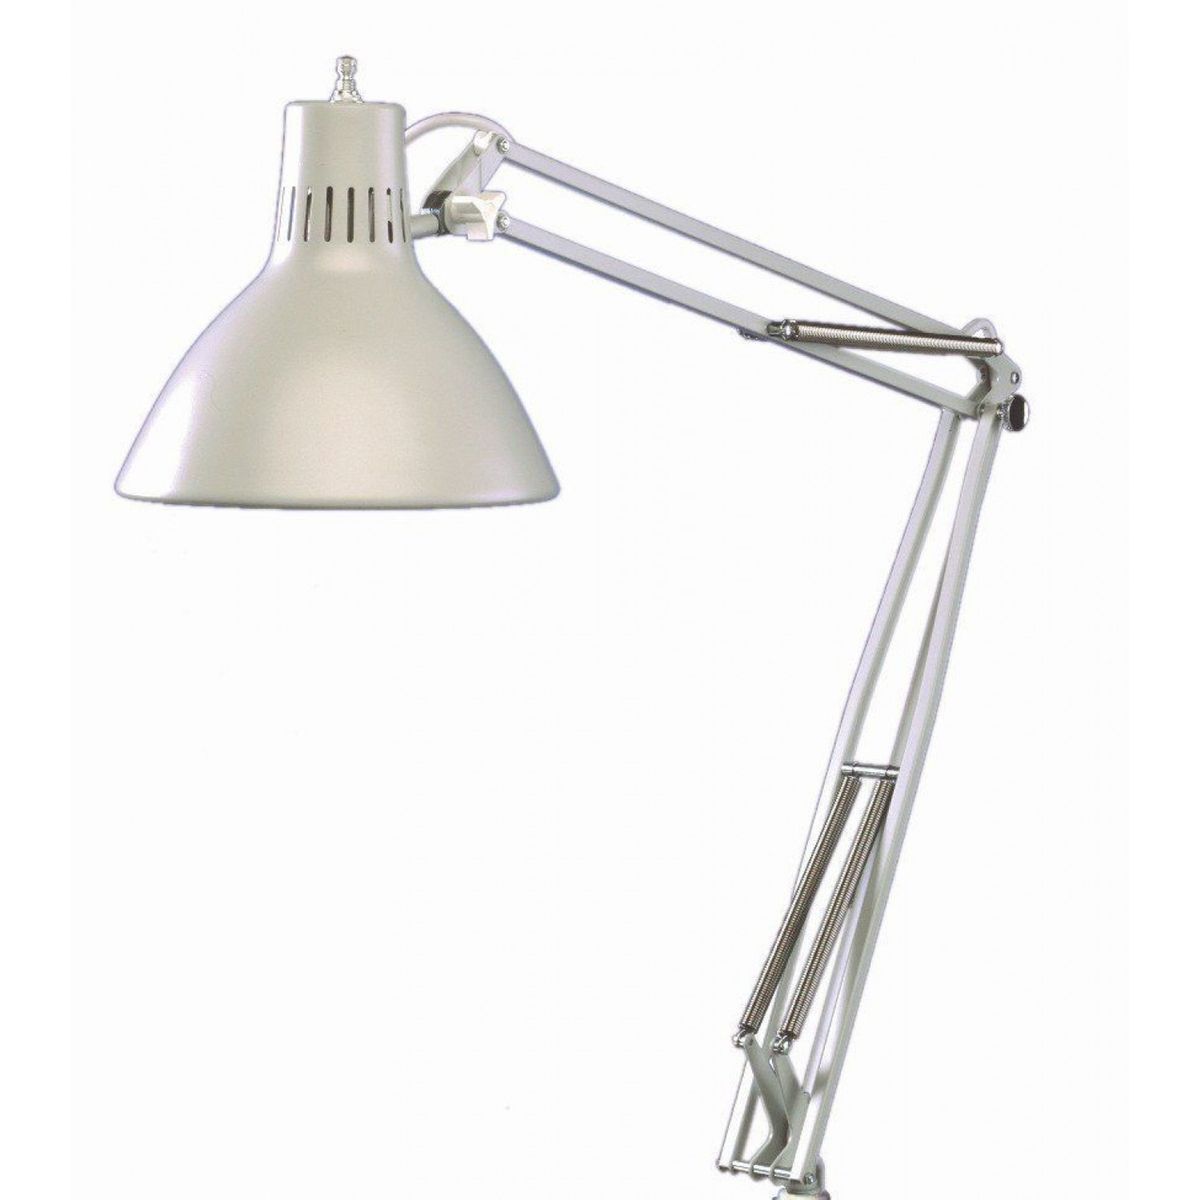 White lamp with silver arm.